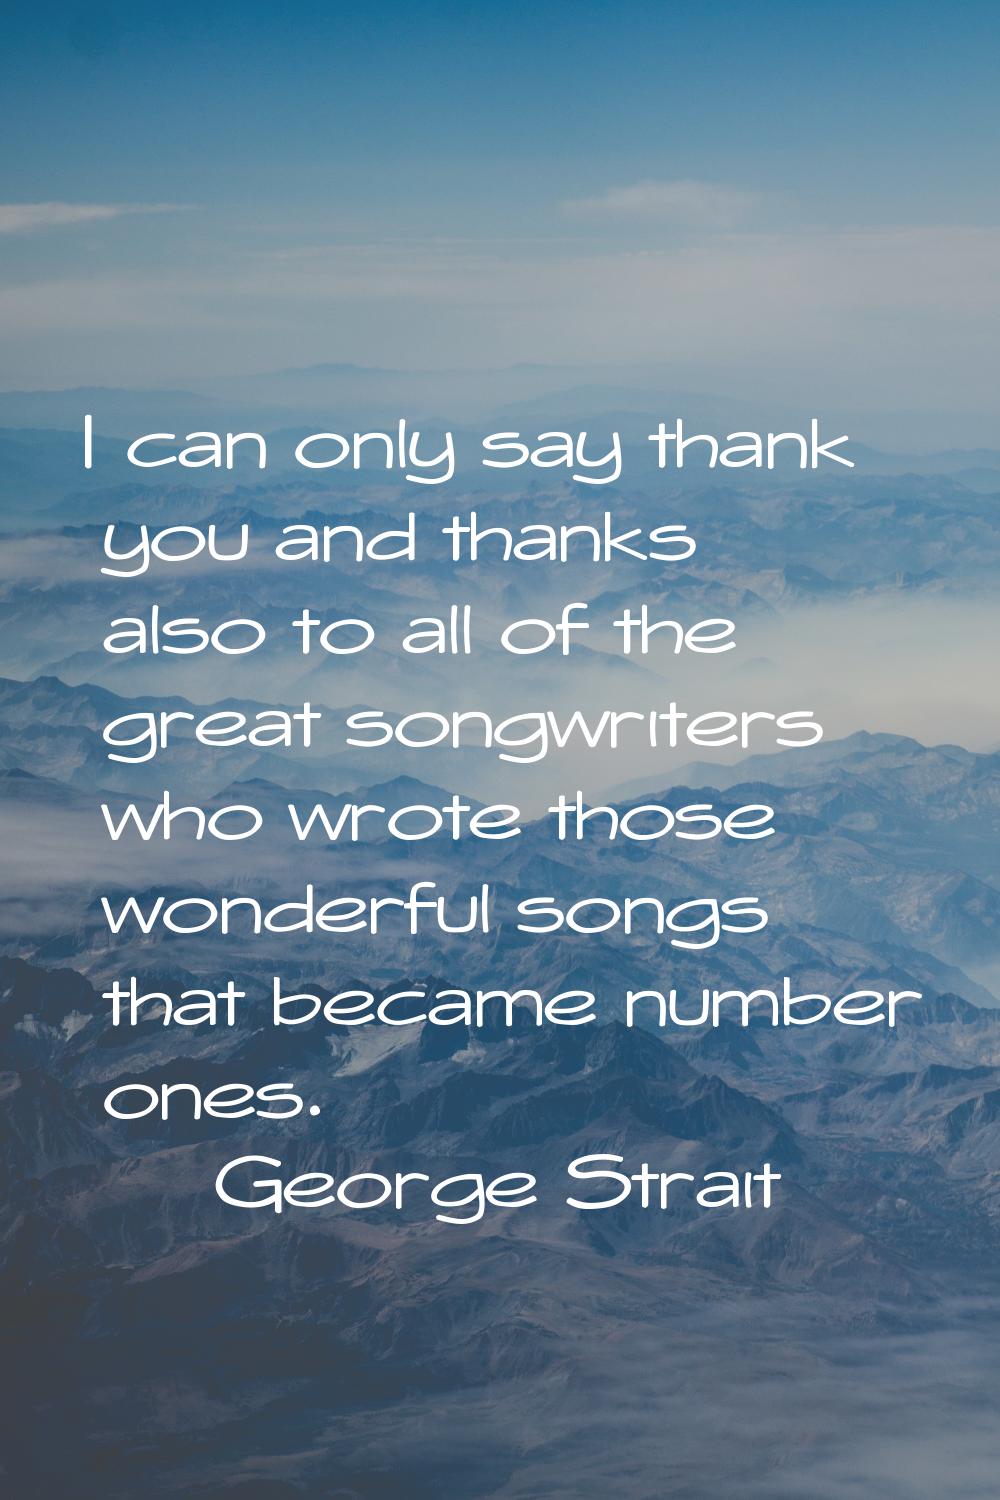 I can only say thank you and thanks also to all of the great songwriters who wrote those wonderful 